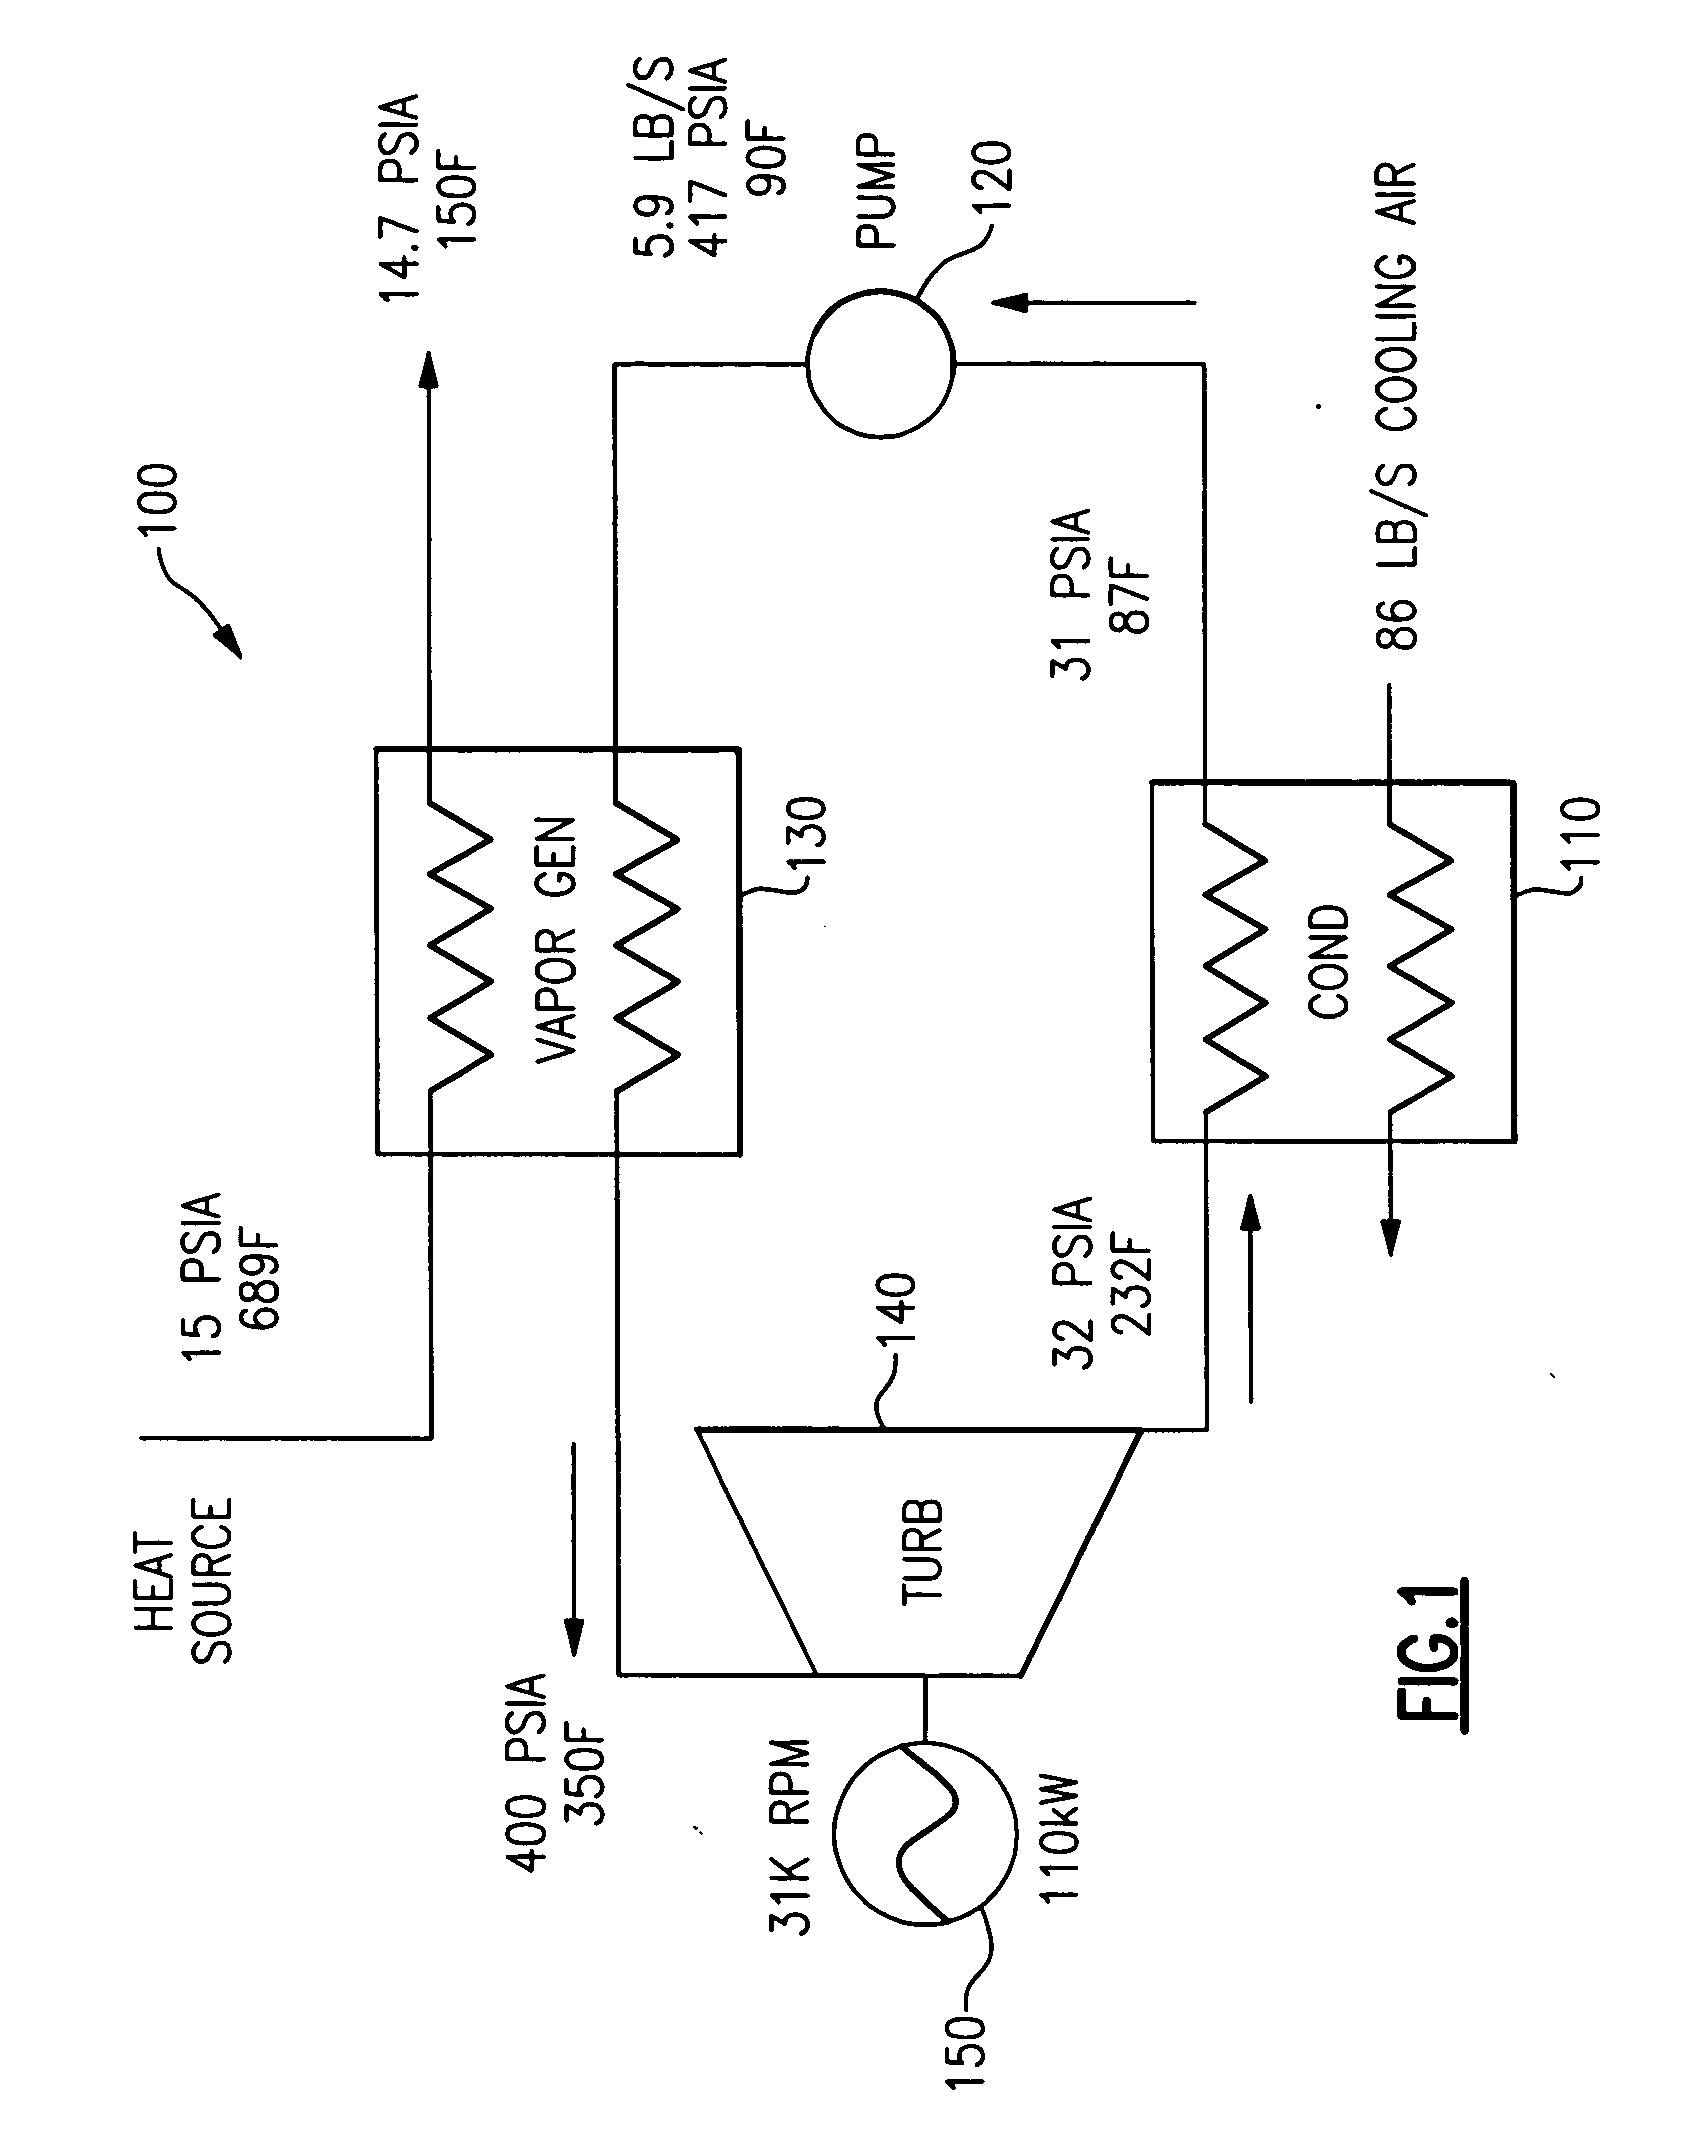 Startup and control methods for an orc bottoming plant